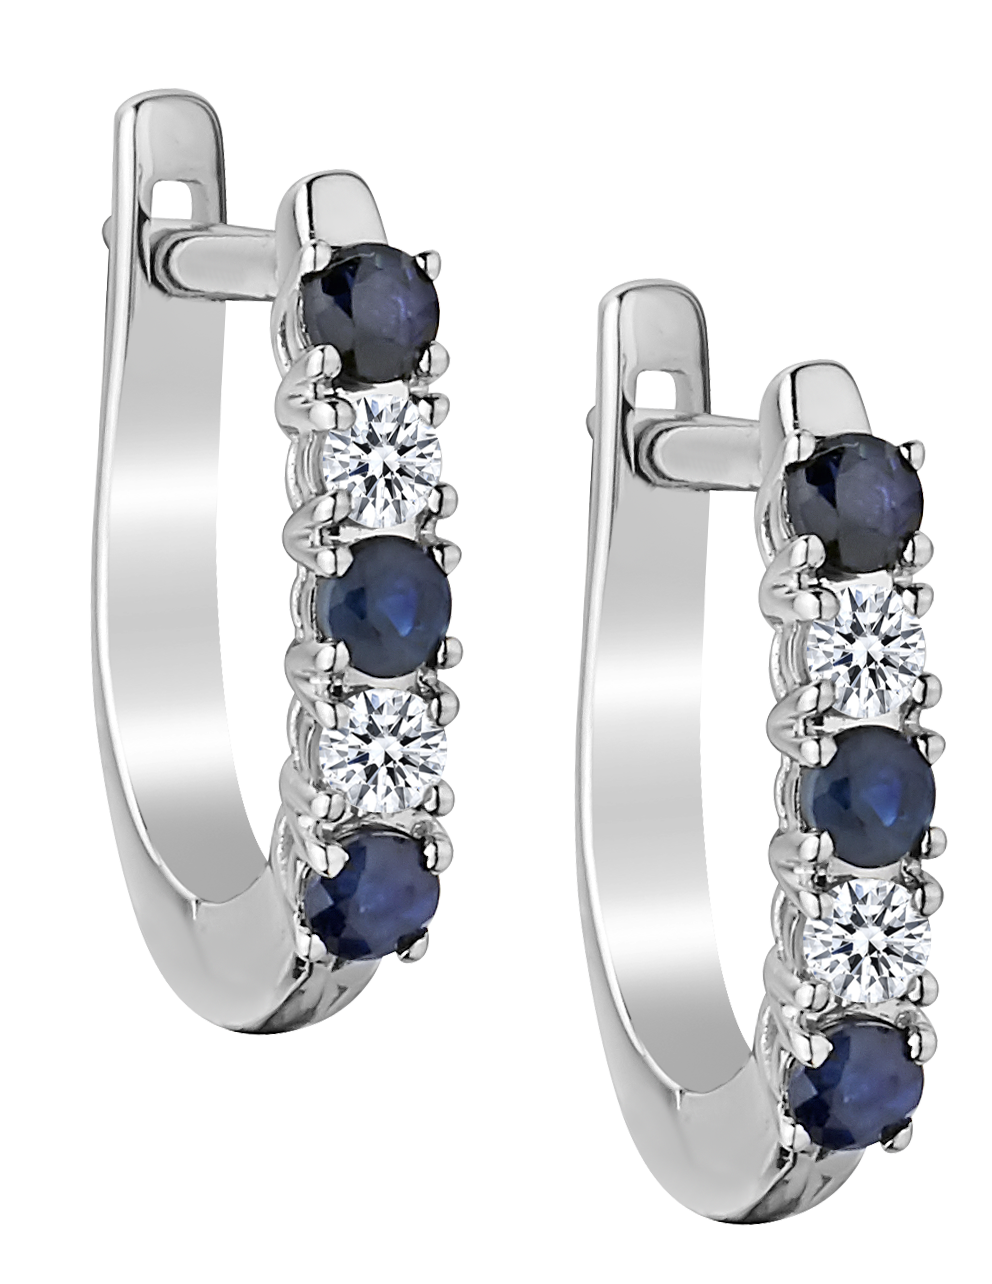 .13 Carat Diamond and Sapphire Earrings in 10kt White Gold with 14kt White Gold Post.......................NOW